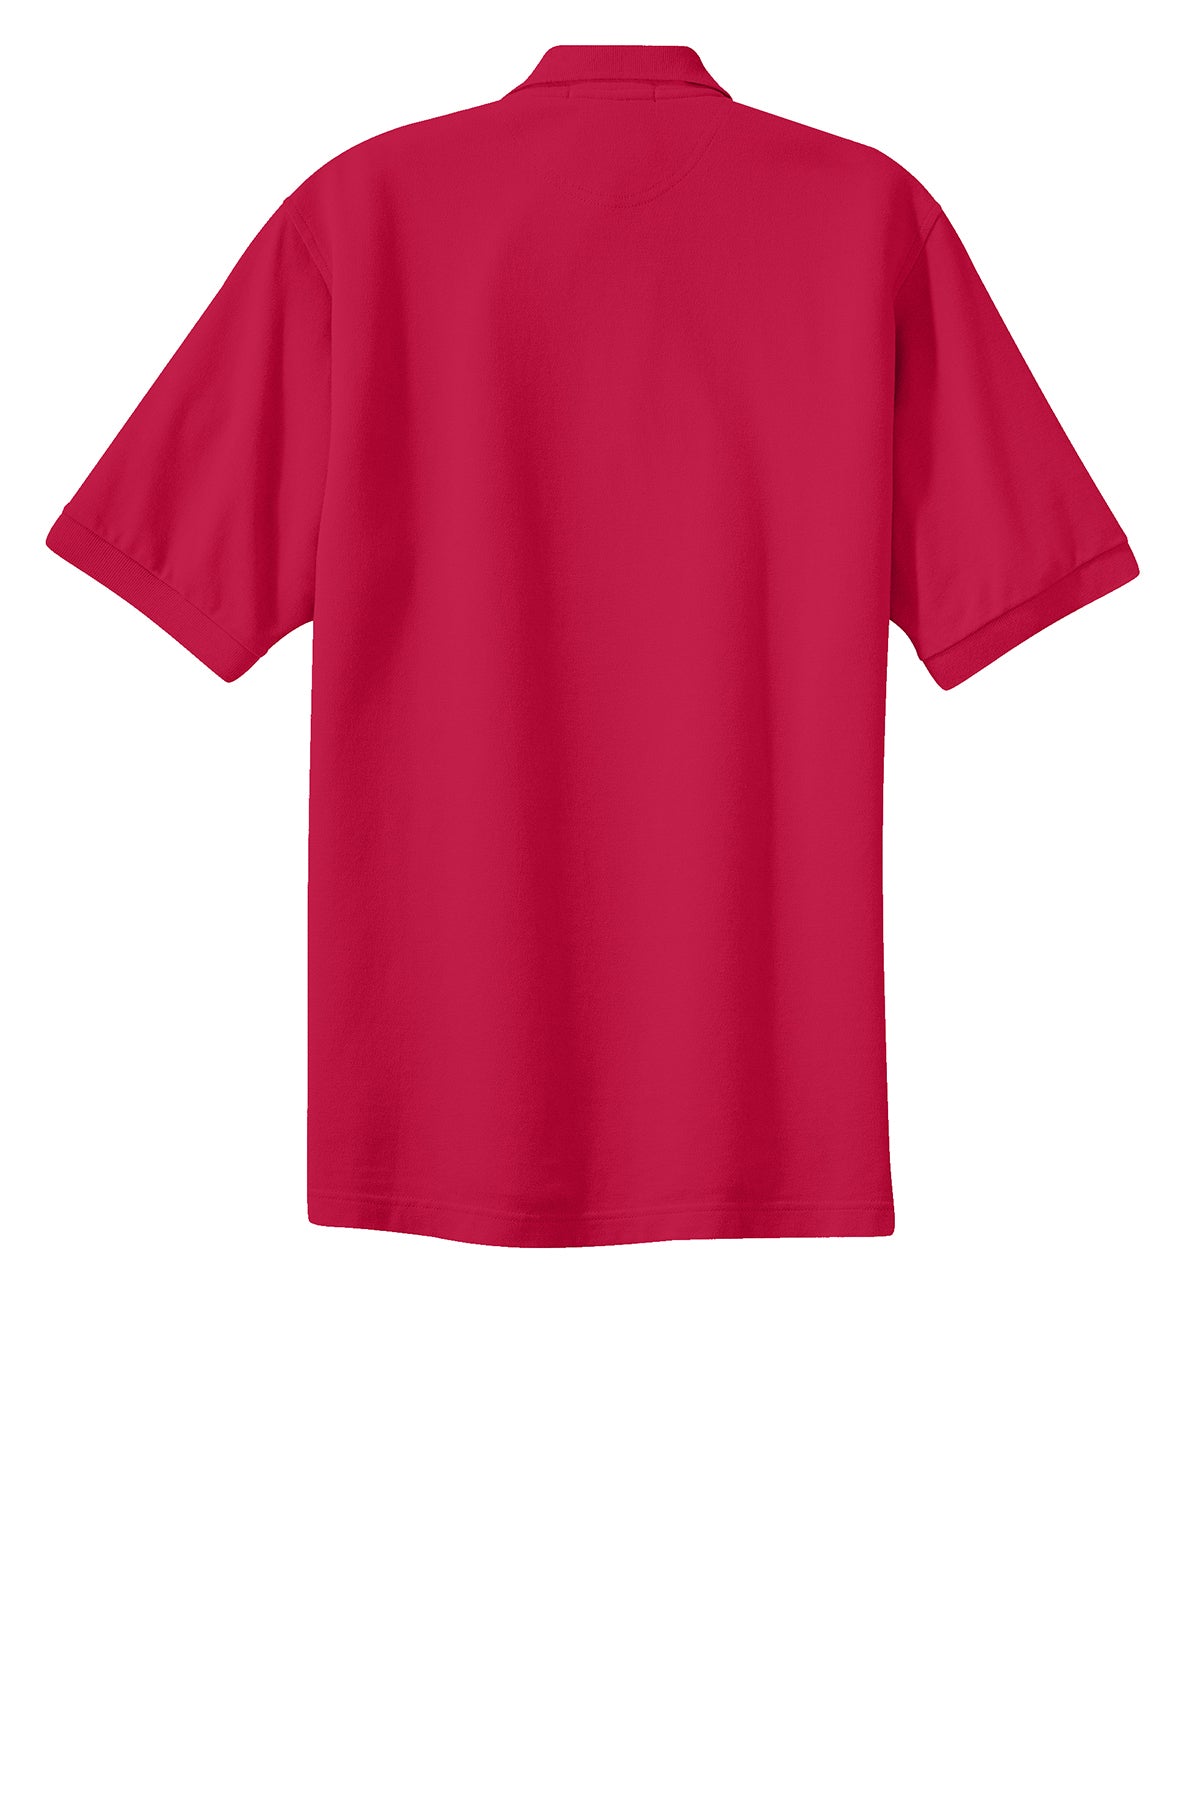 Port Authority® Heavyweight Cotton Pique Polo - K420 - Red